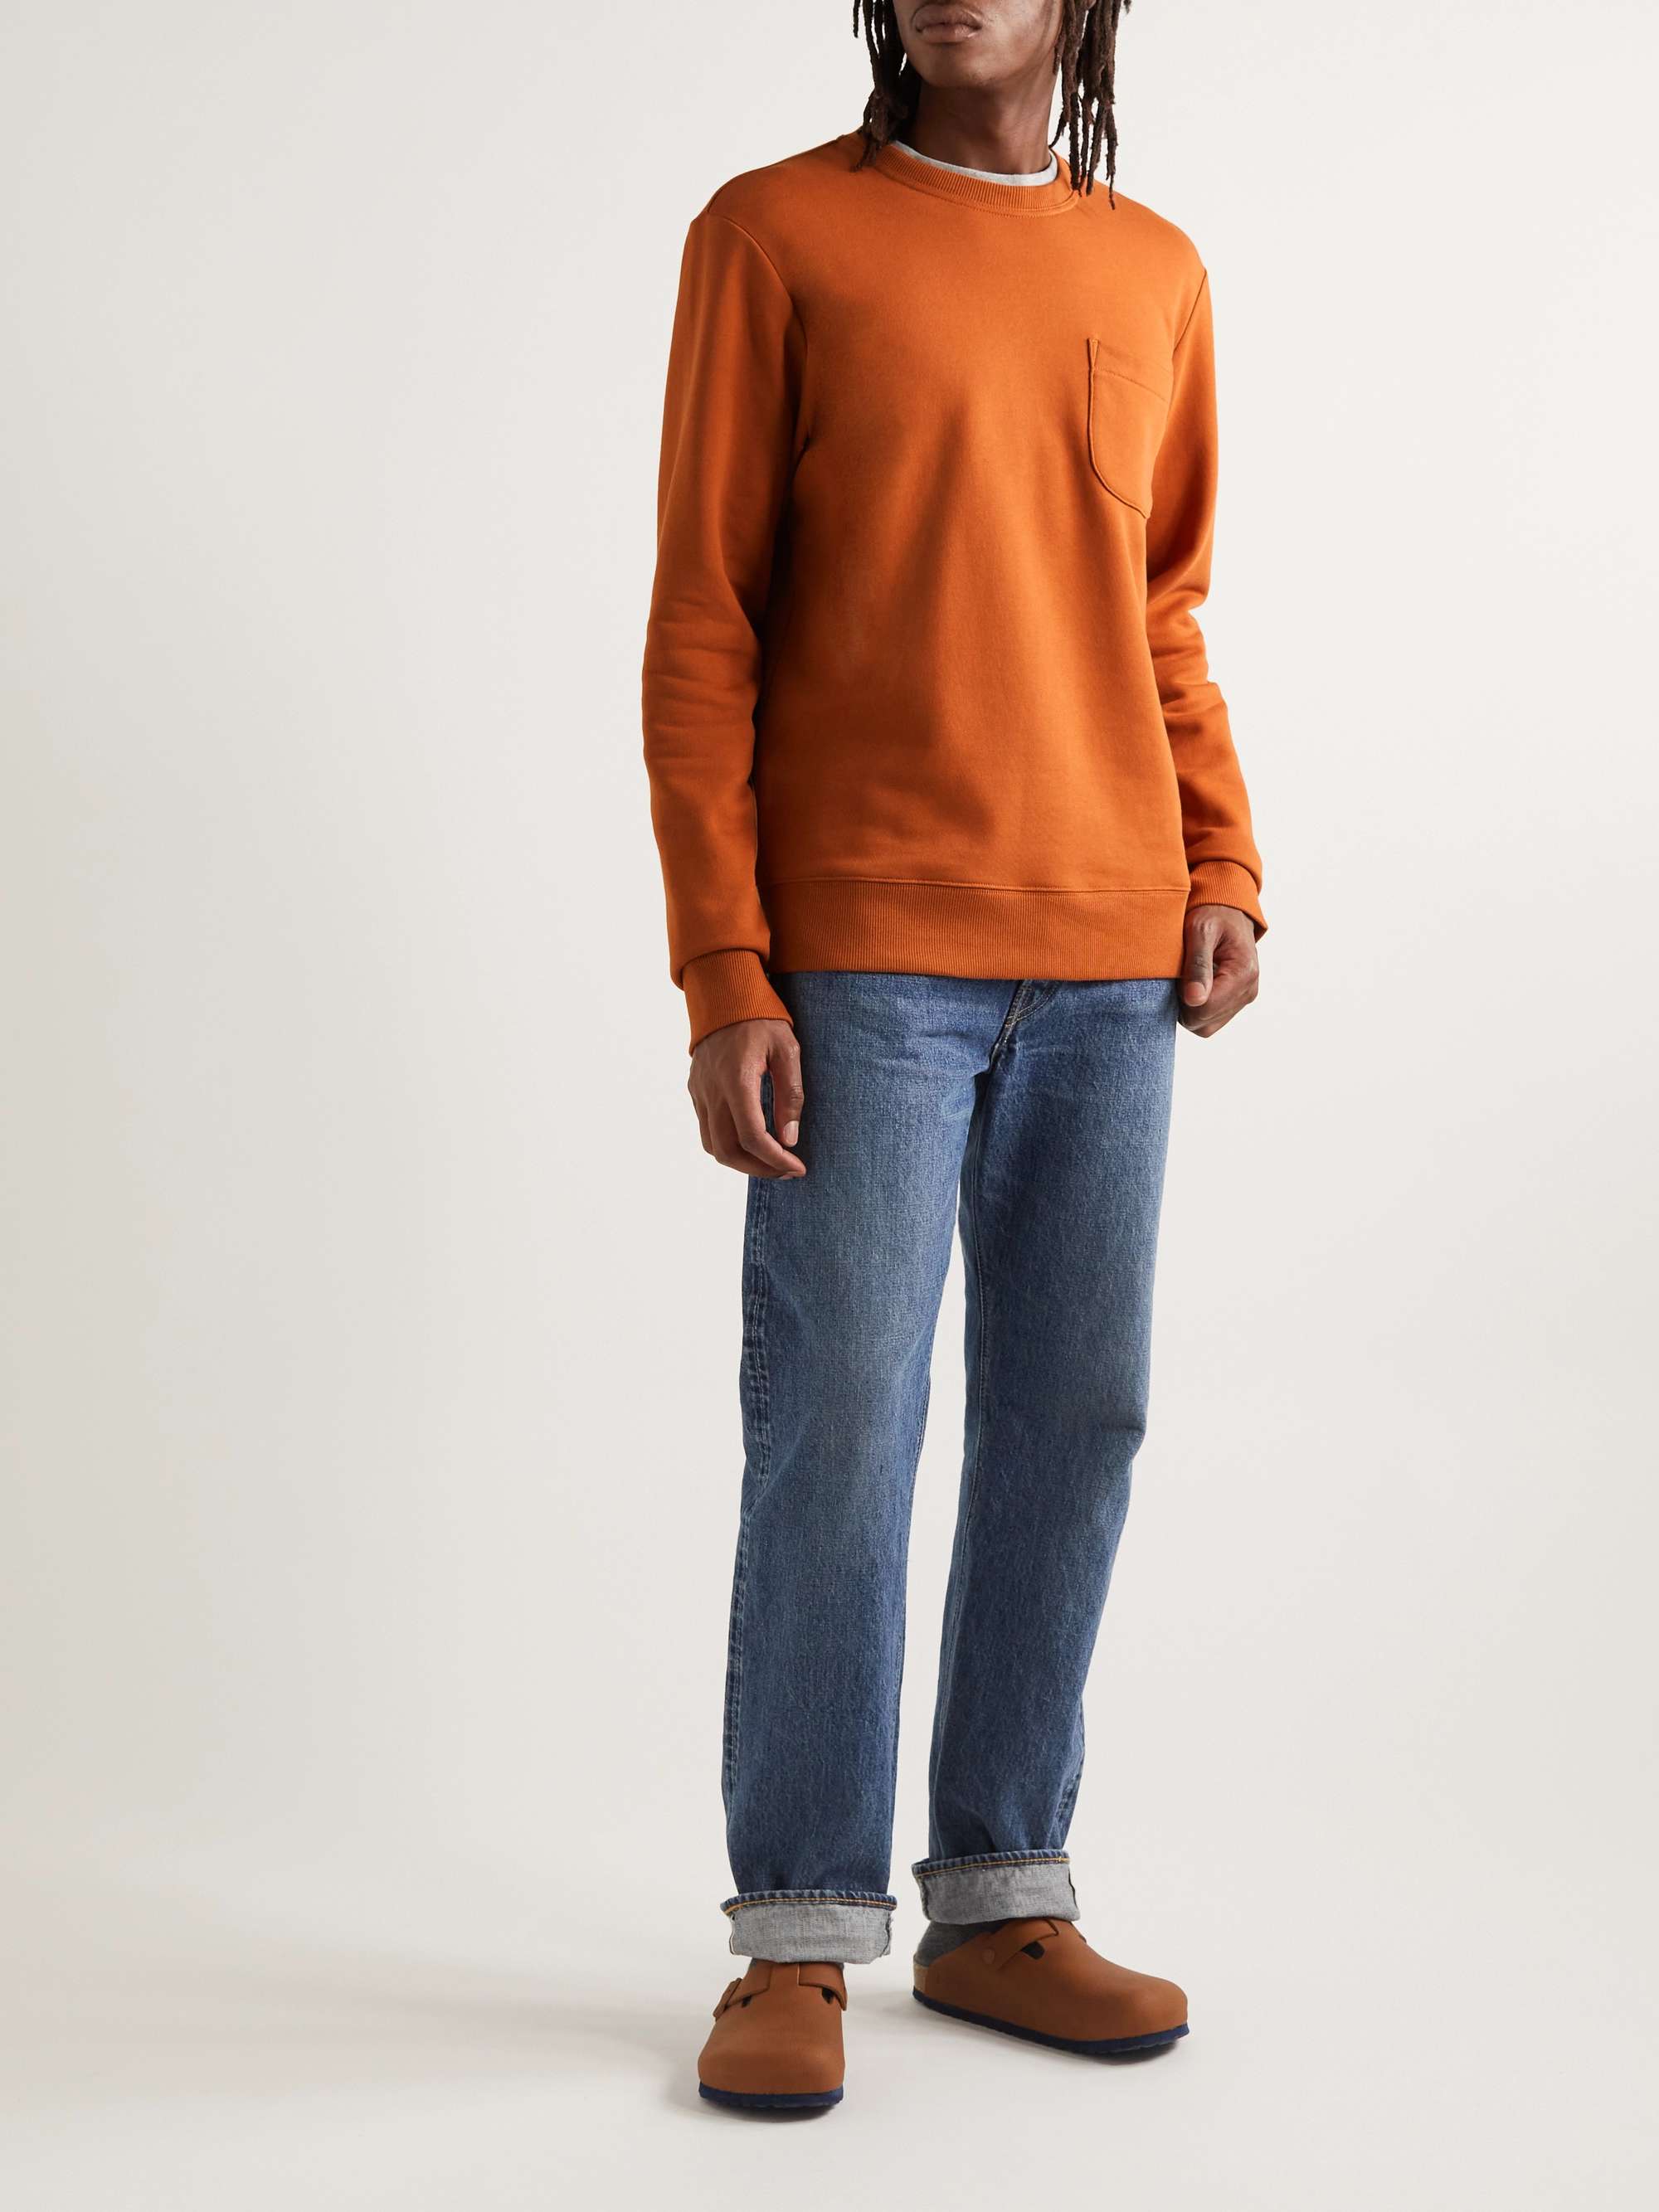 OUTERKNOWN All-Day Organic Cotton-Blend Jersey Sweatshirt